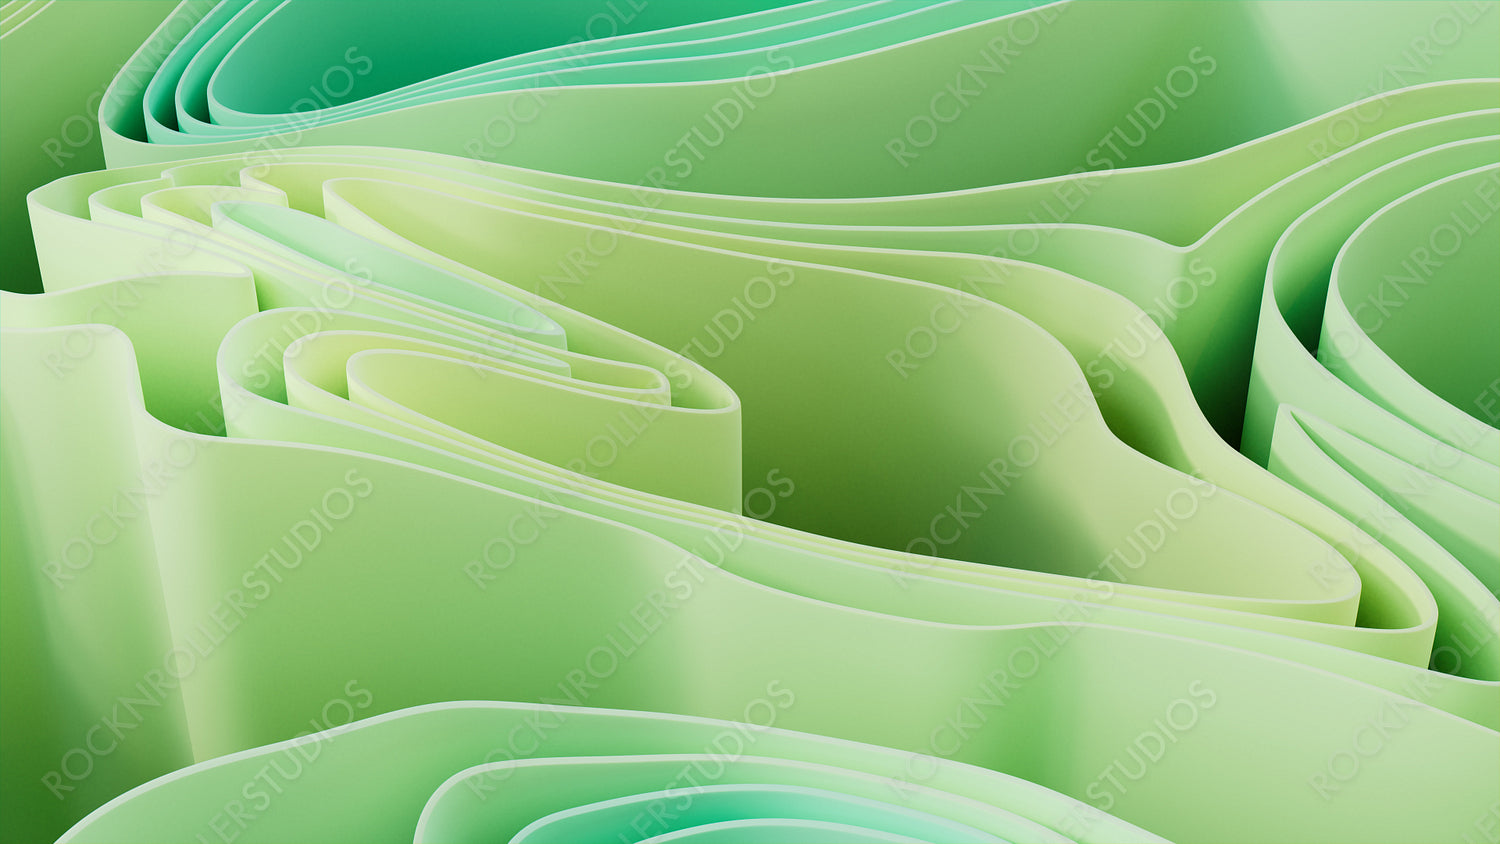 Abstract background made of Aqua and Green 3D Ribbons. Multicolored 3D Render. 